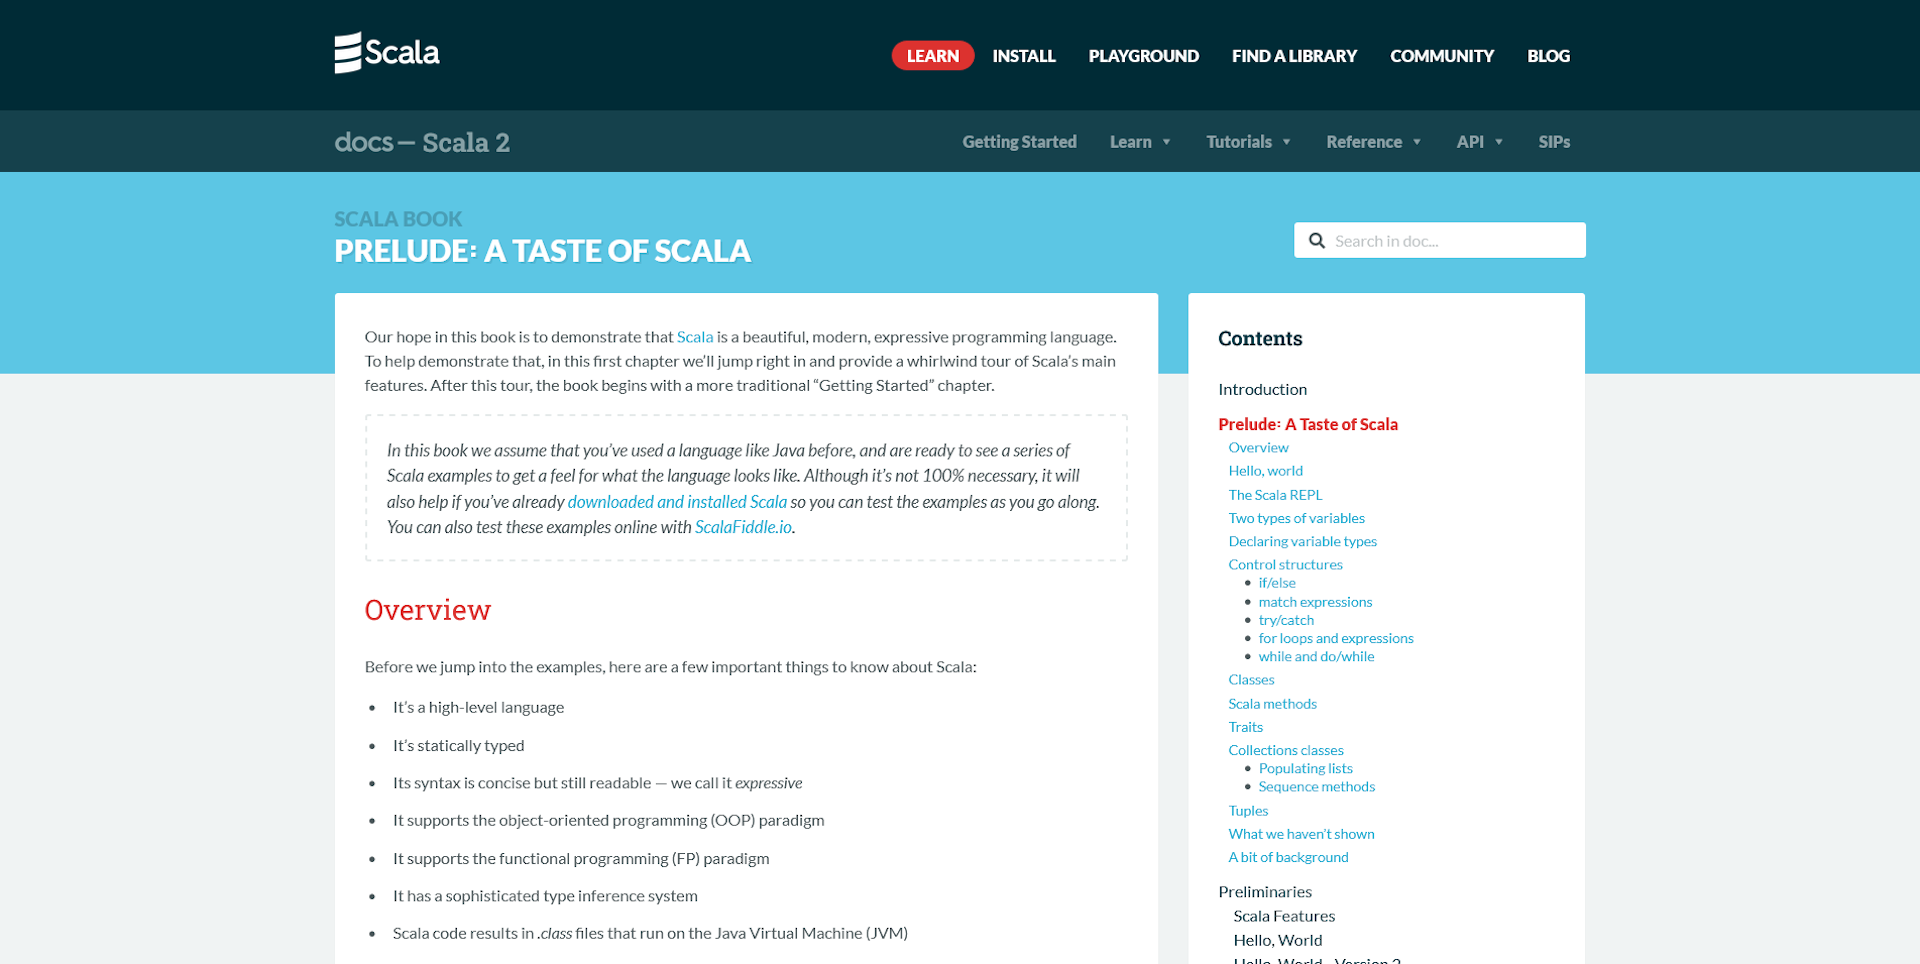 The official Scala docs